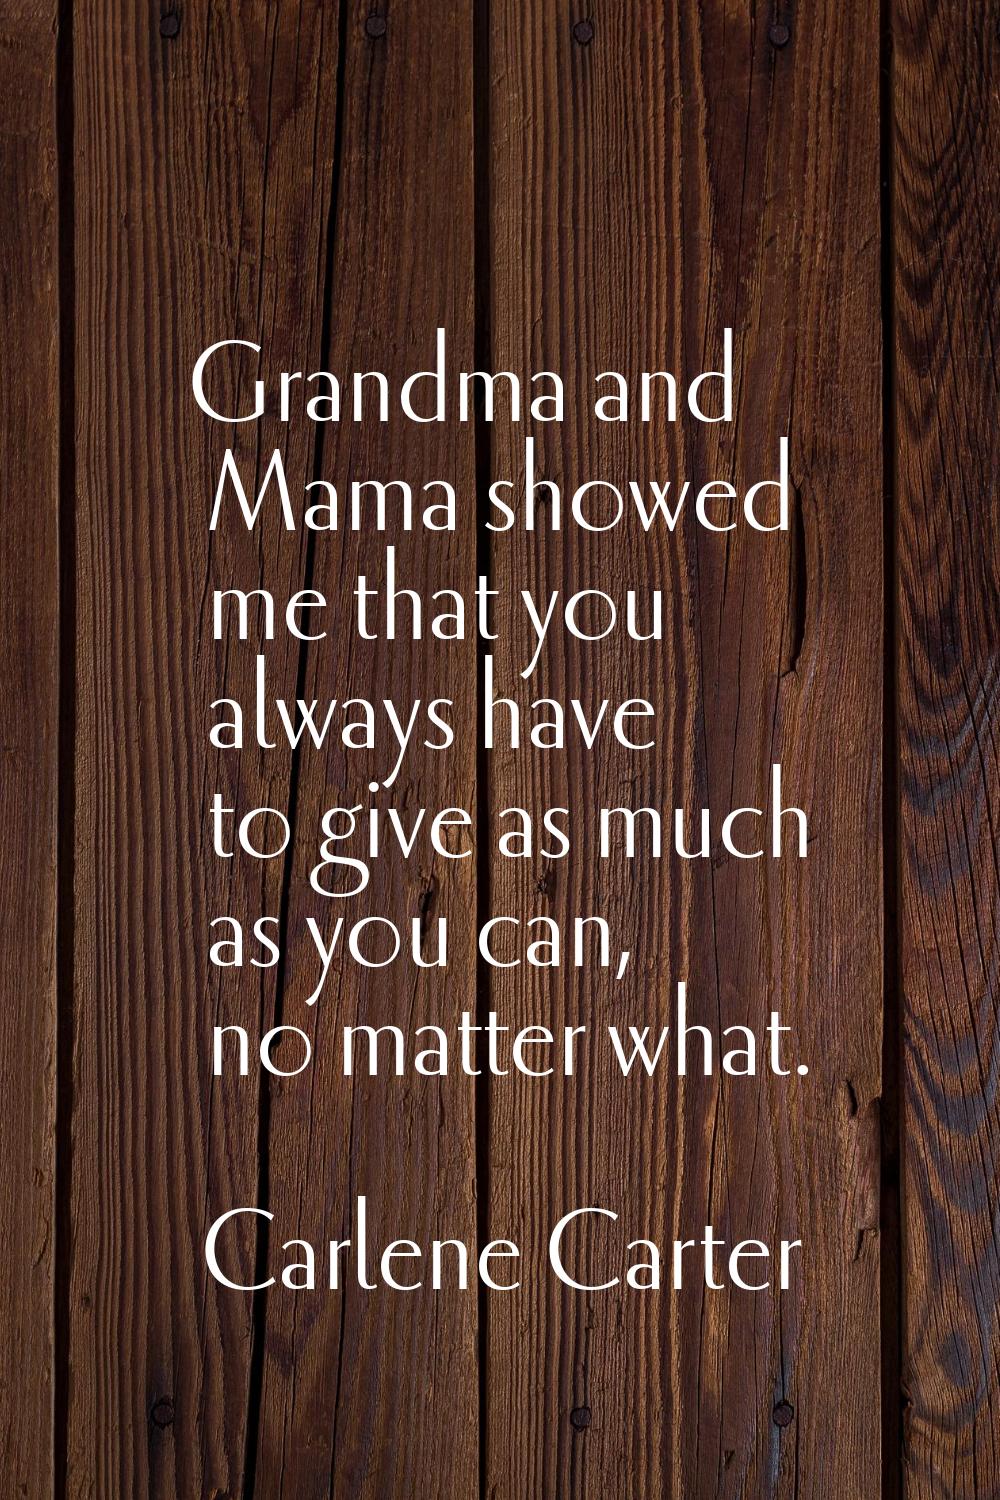 Grandma and Mama showed me that you always have to give as much as you can, no matter what.